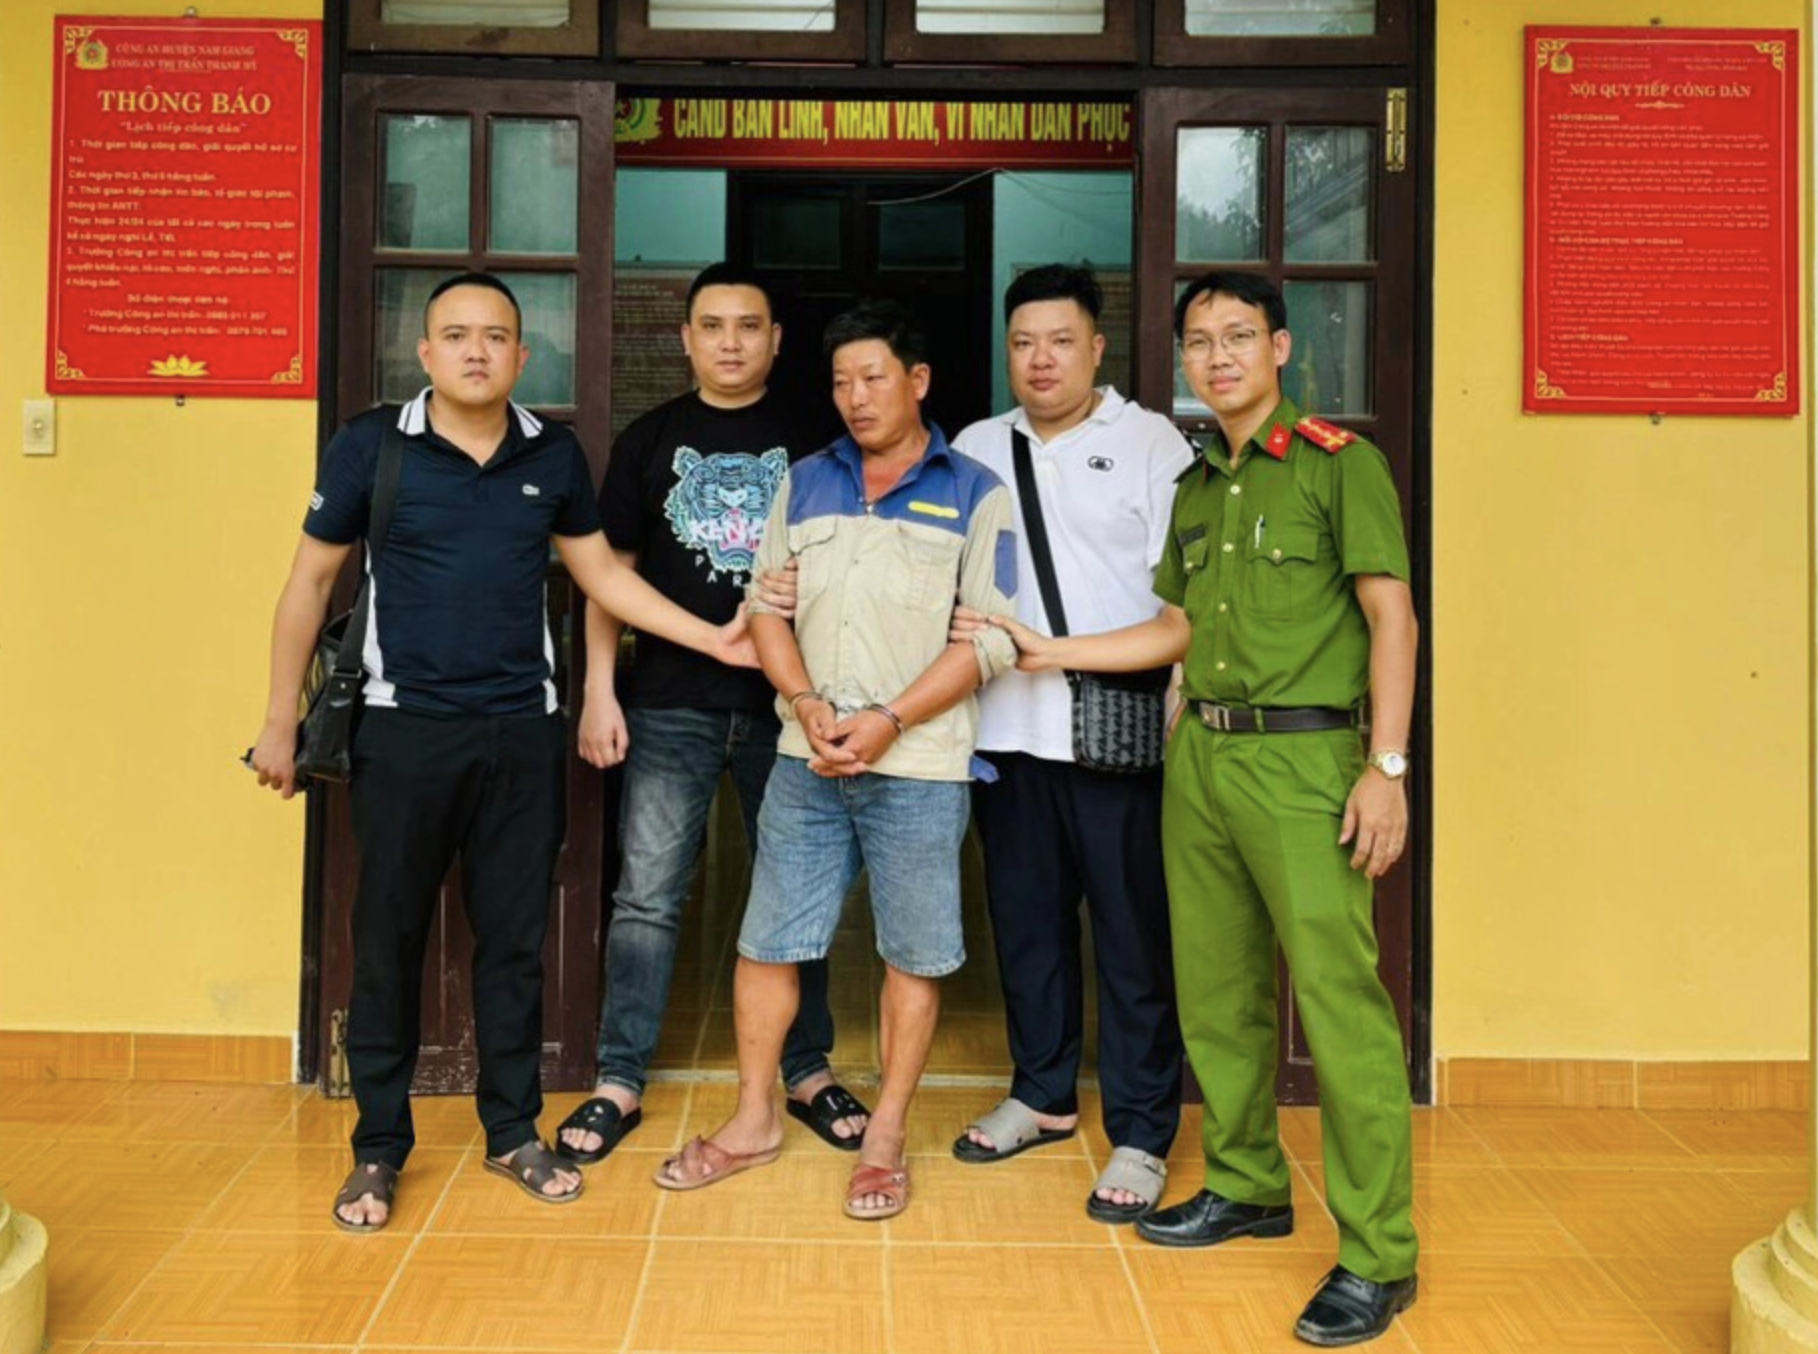 Vietnamese fugitive arrested after 33 years